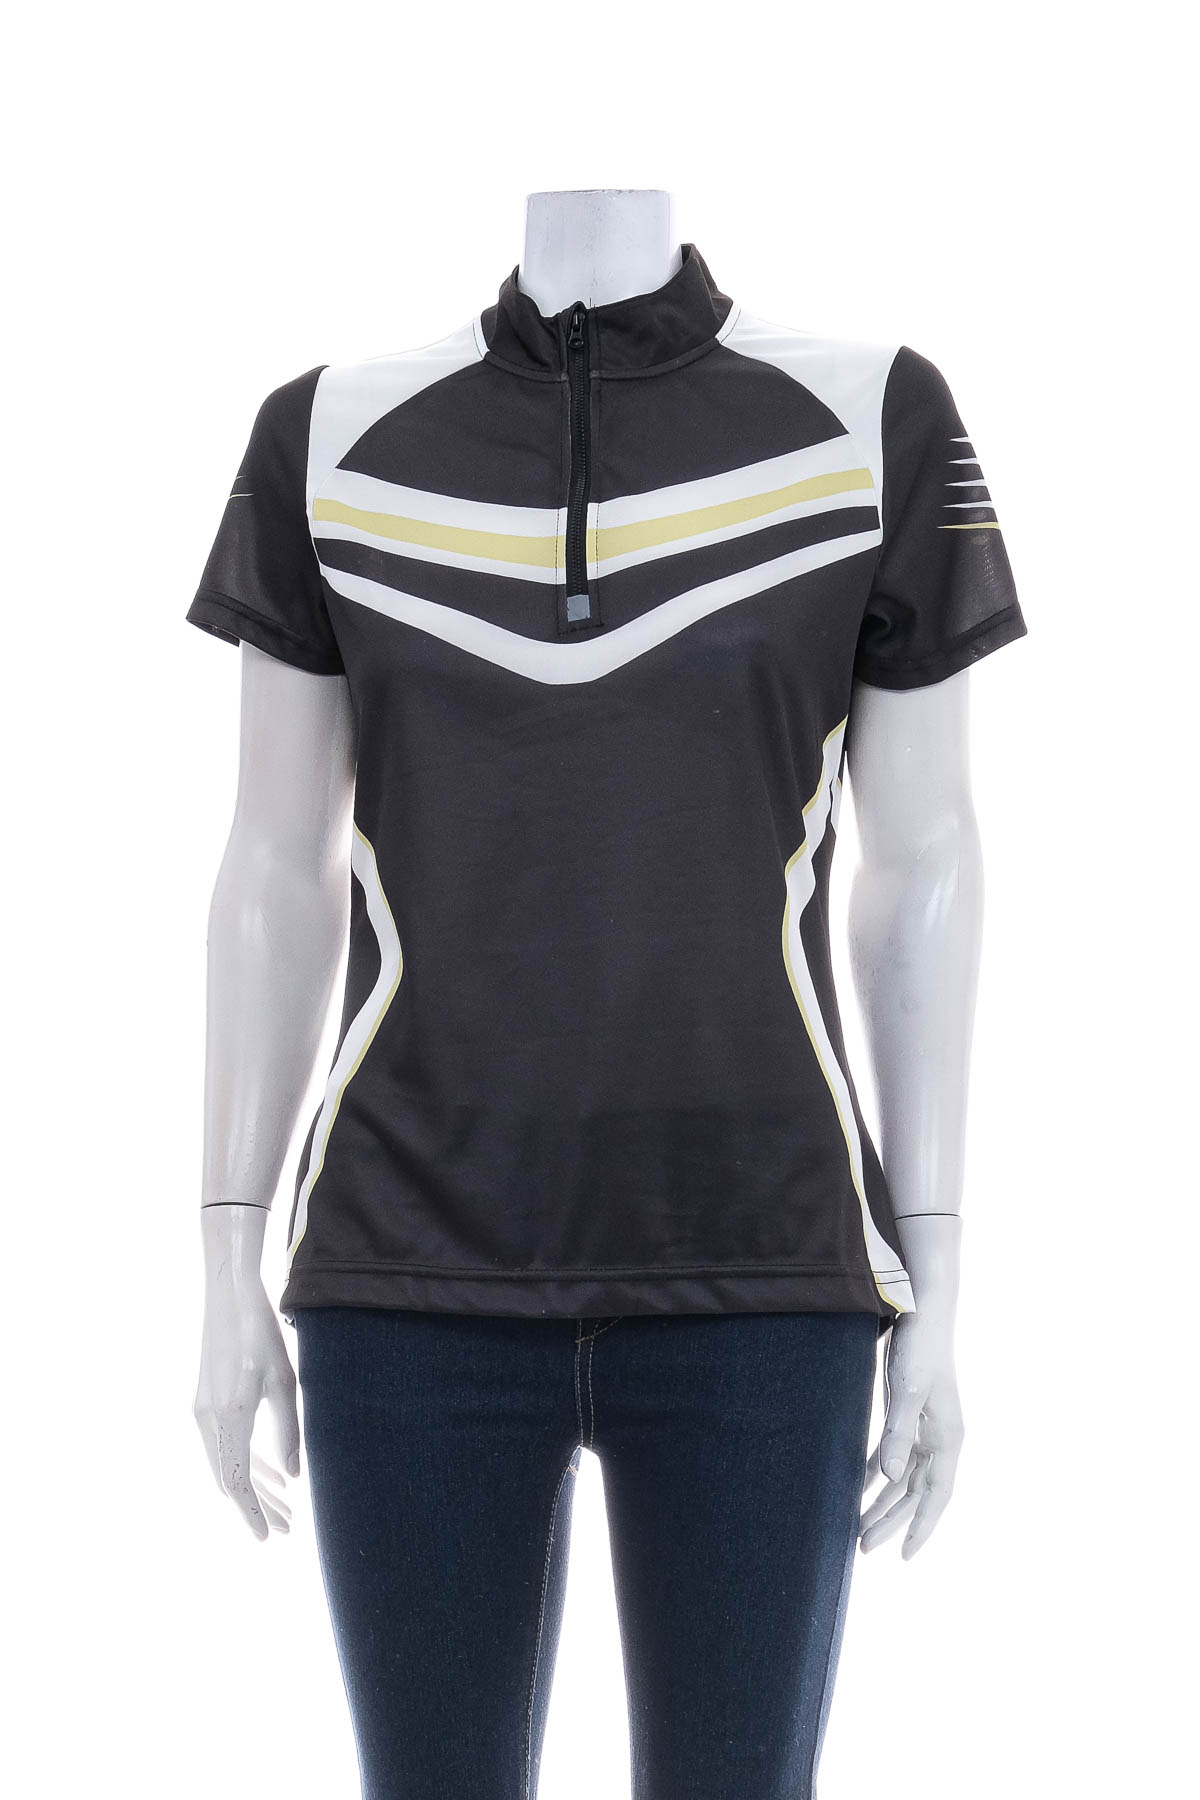 Female sports top for cycling - Crivit - 0